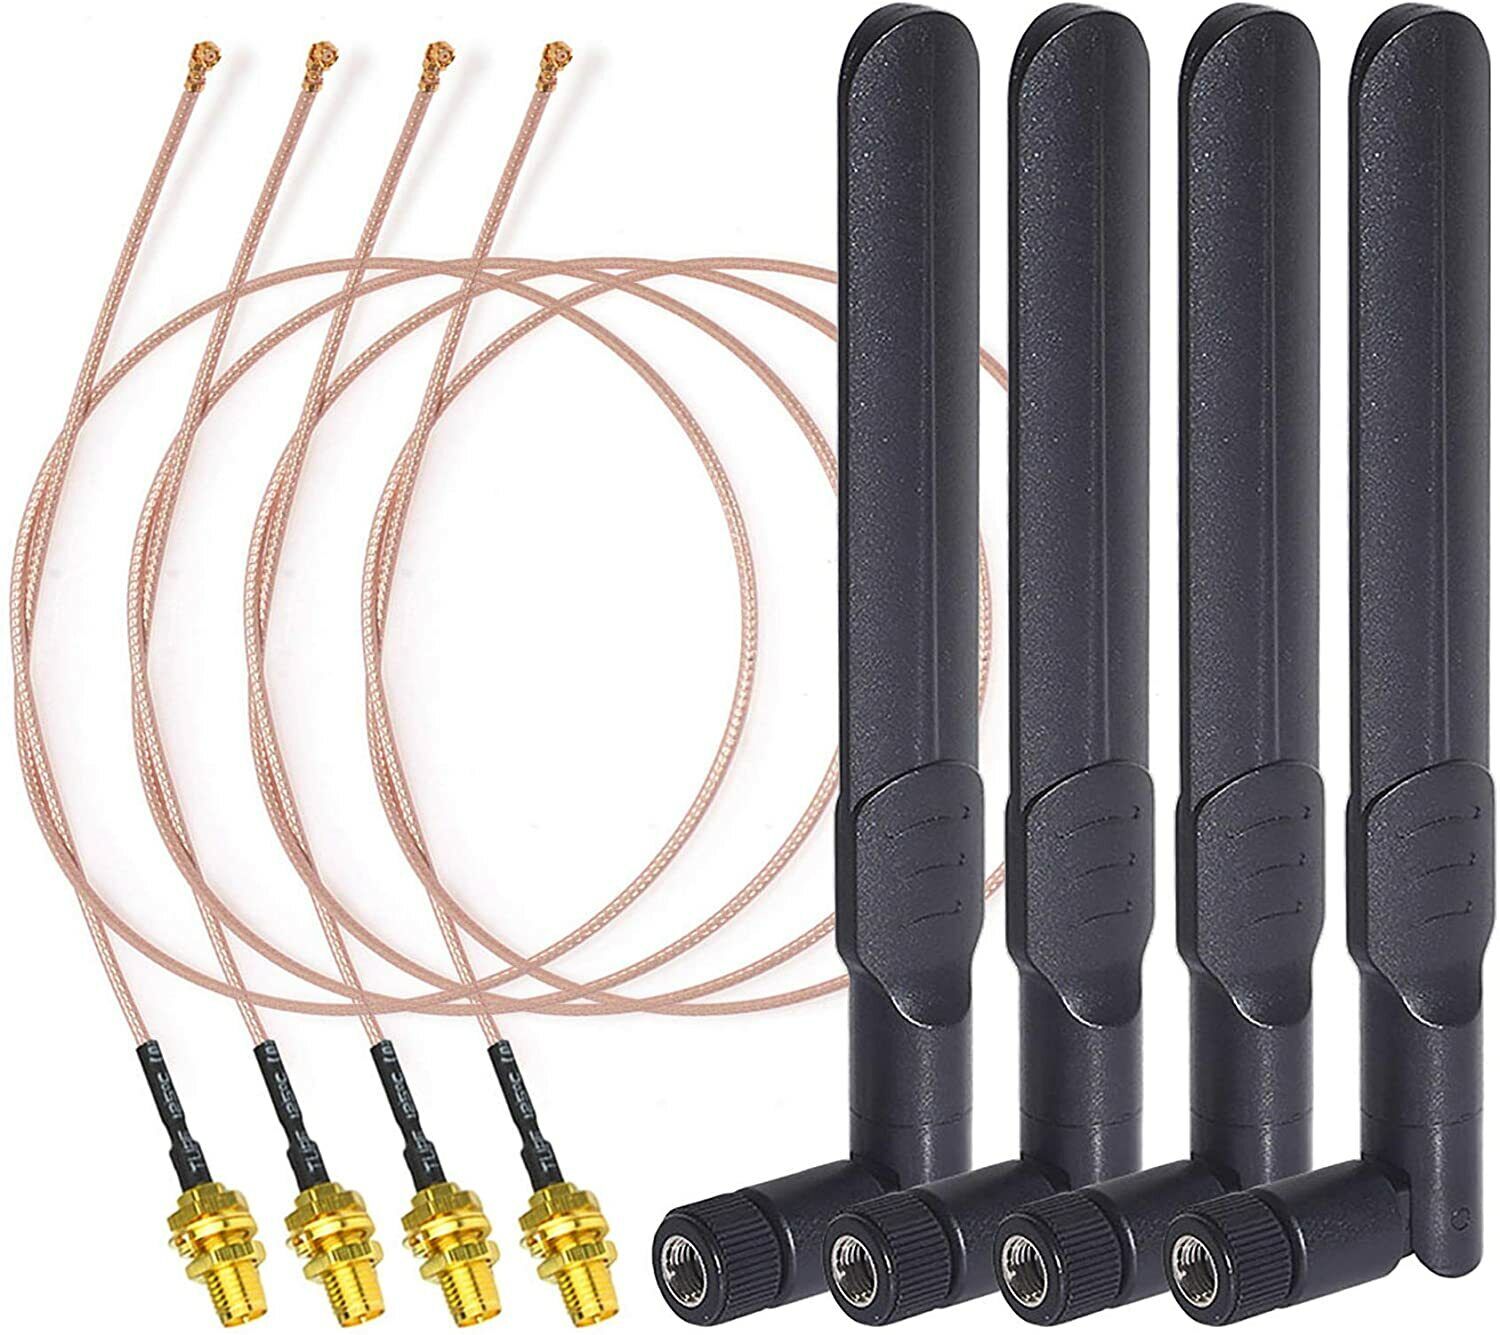 4pcs Dual Band WiFi 8dBi RP-SMA Antenna U.FL IPX IPEX 20cm Cable for WiFi Router